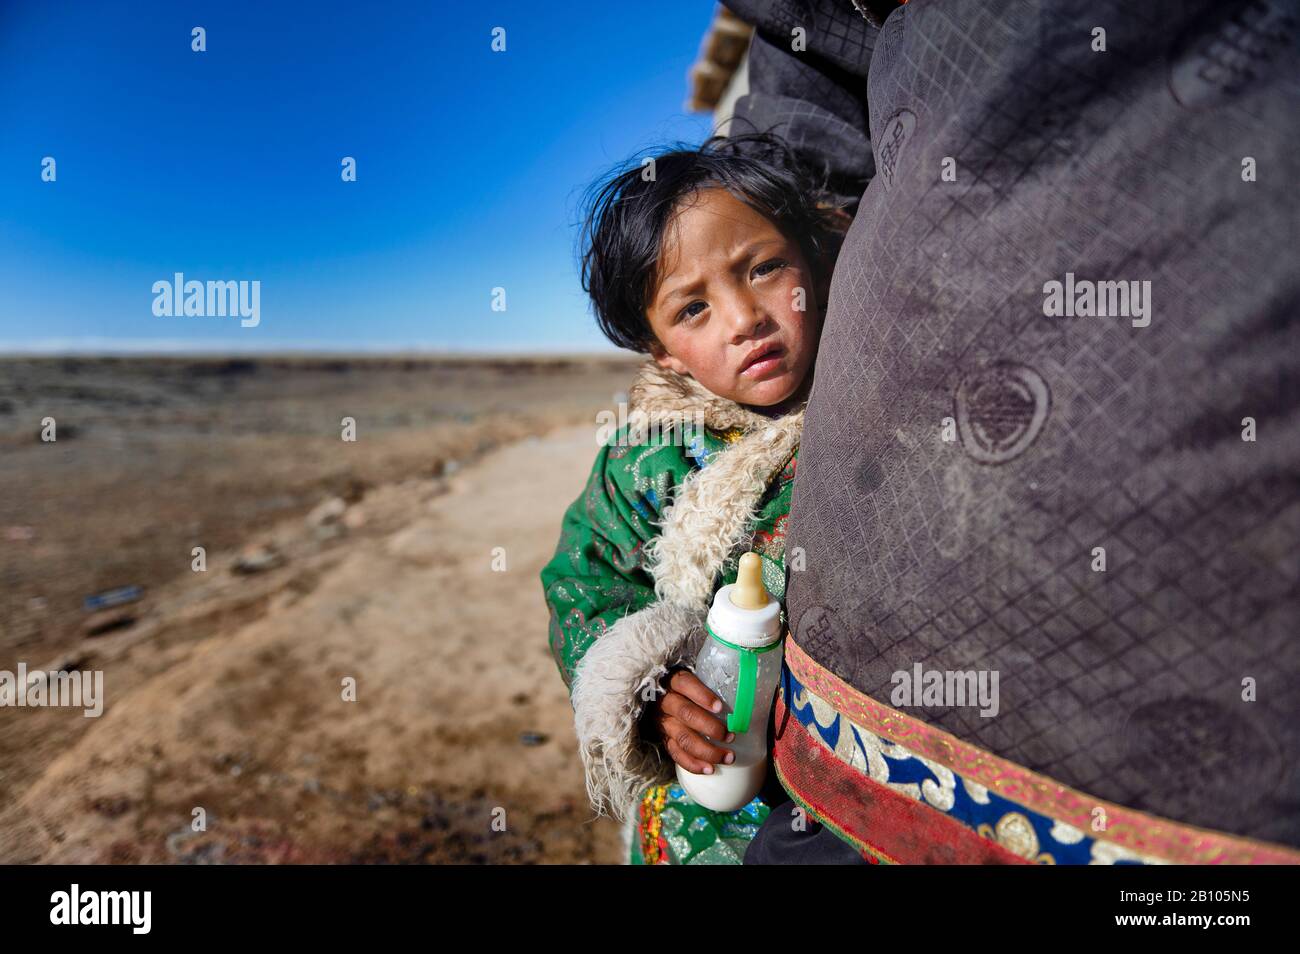 Little tibetans growing in remote regions grow very close to their parents, who from an early age teach them how to undertake the life in such a harsh environment. Remote Tibetan plateau Stock Photo